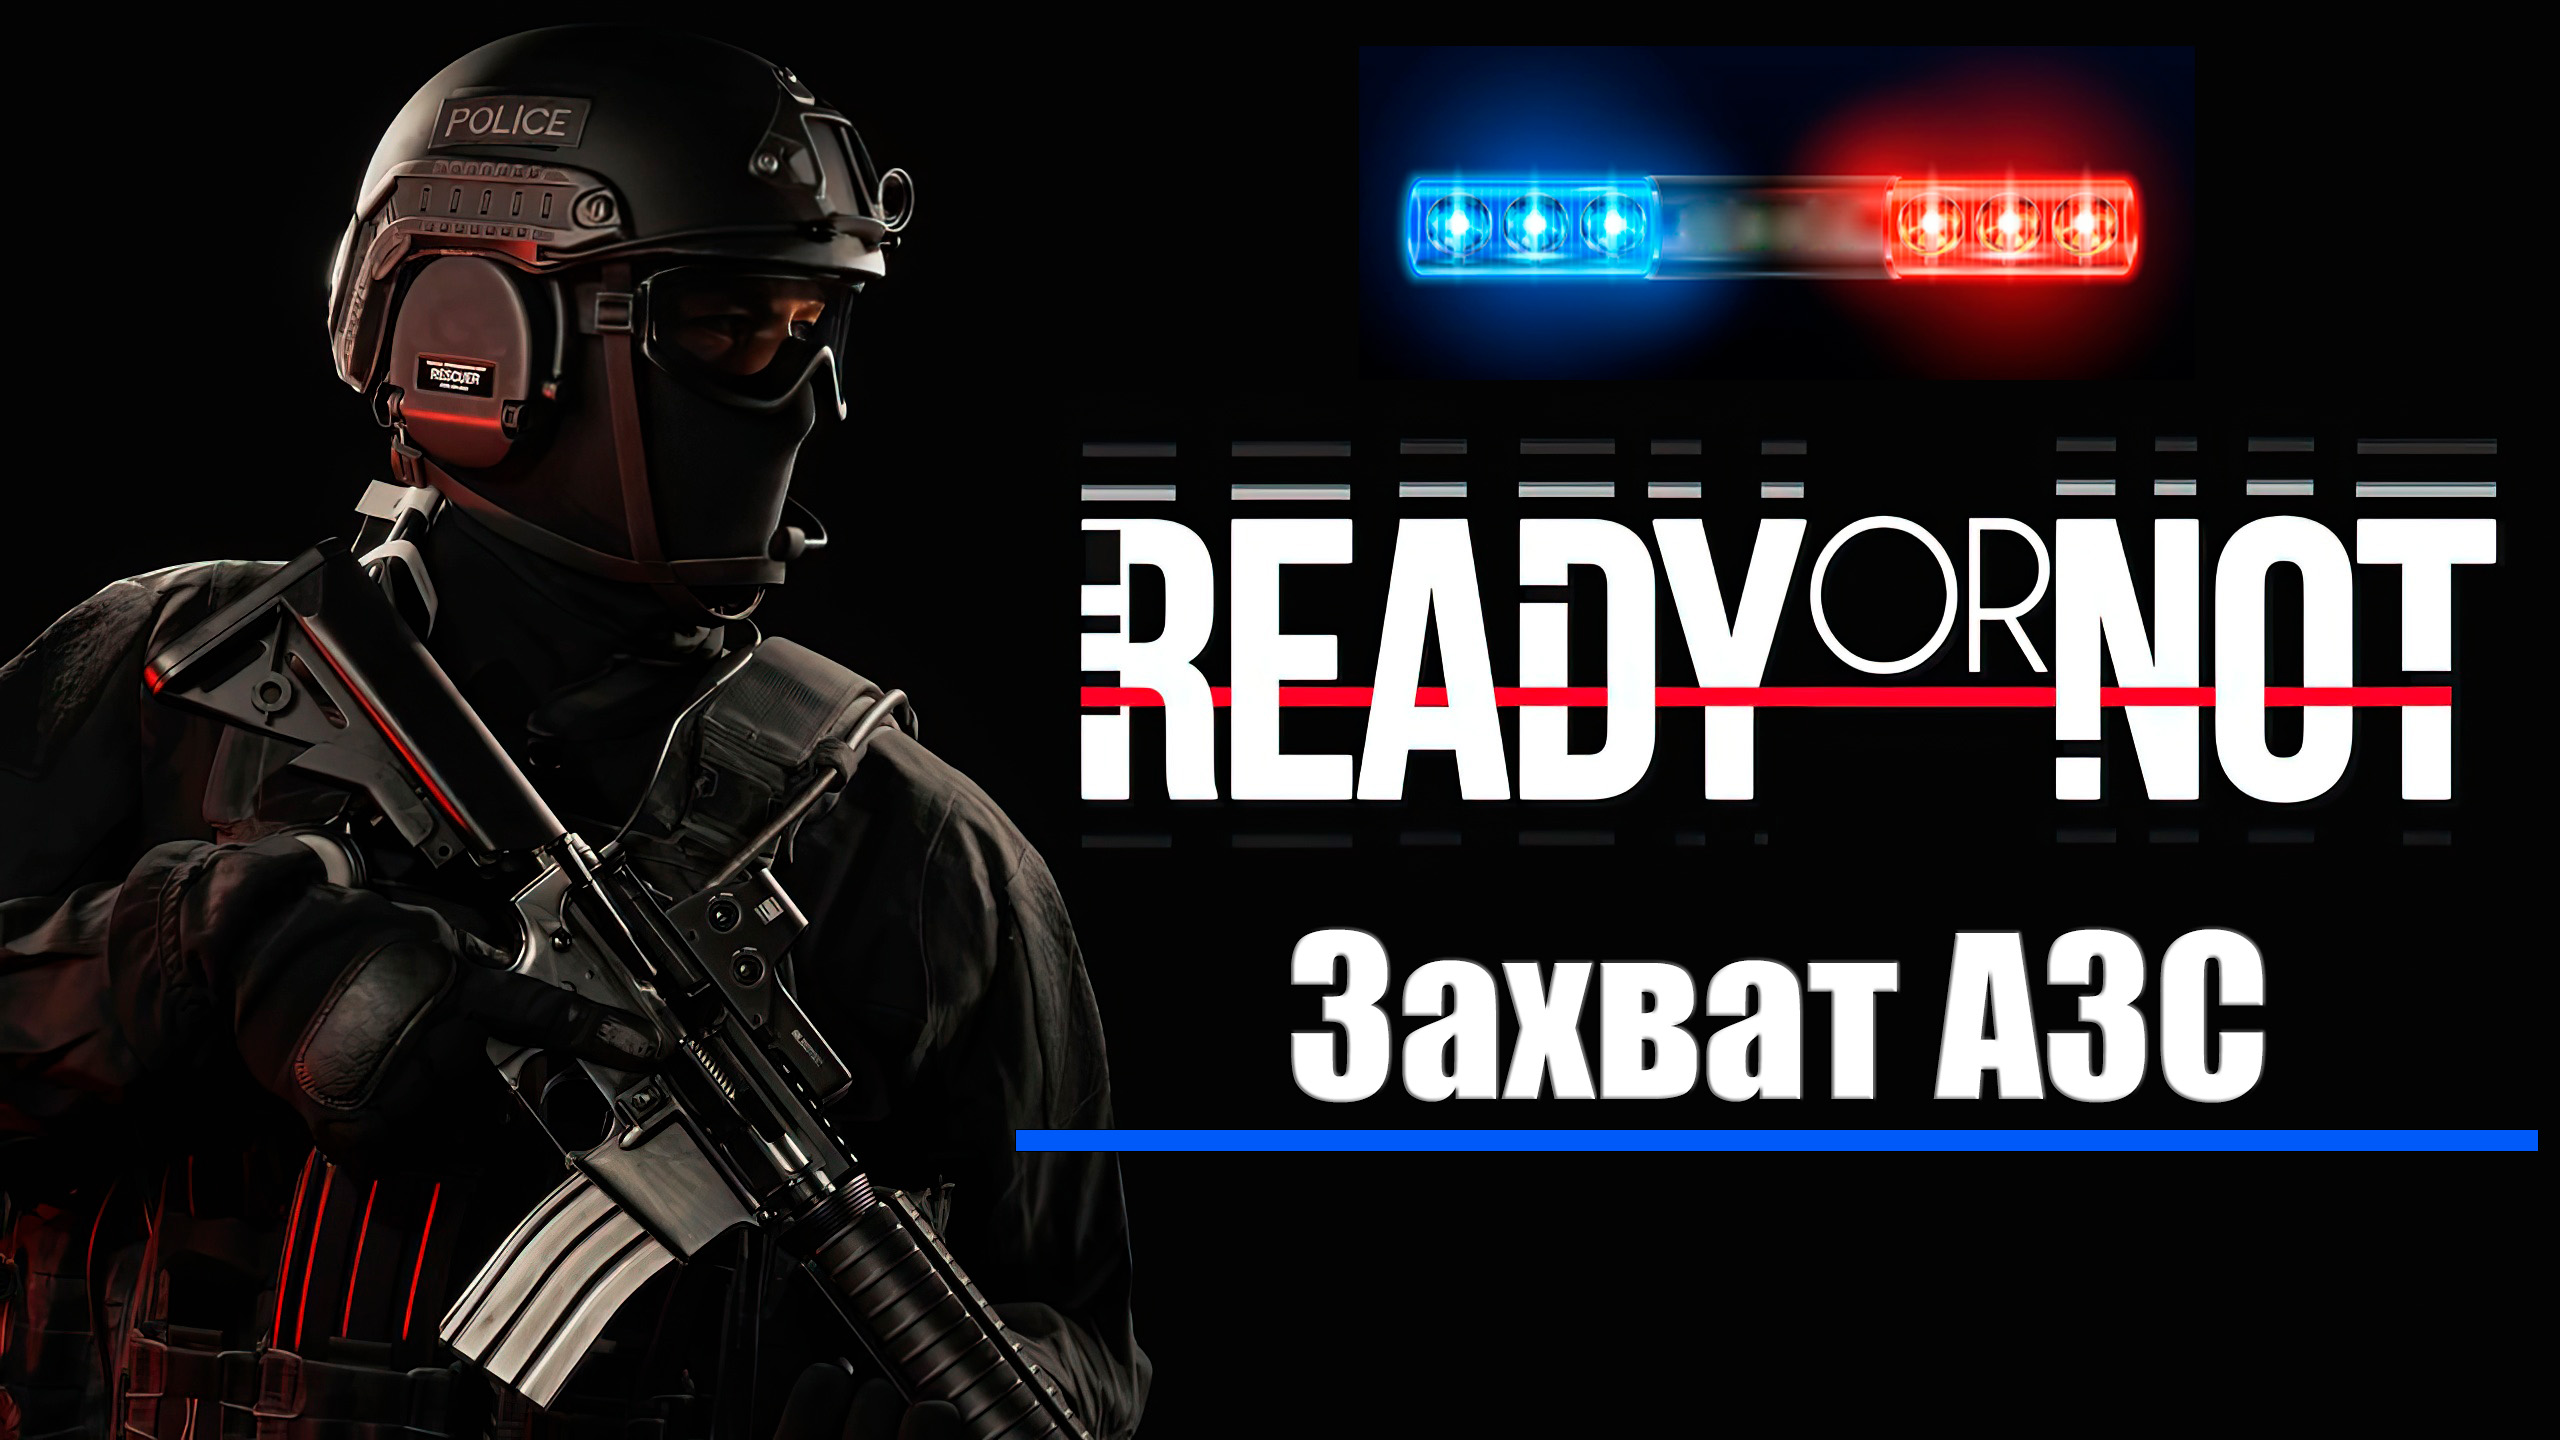 Ready or not язык. Ready or not игра. SWAT 4 АЗС. Ready or not карты. Обои еа телефон Redi or not.